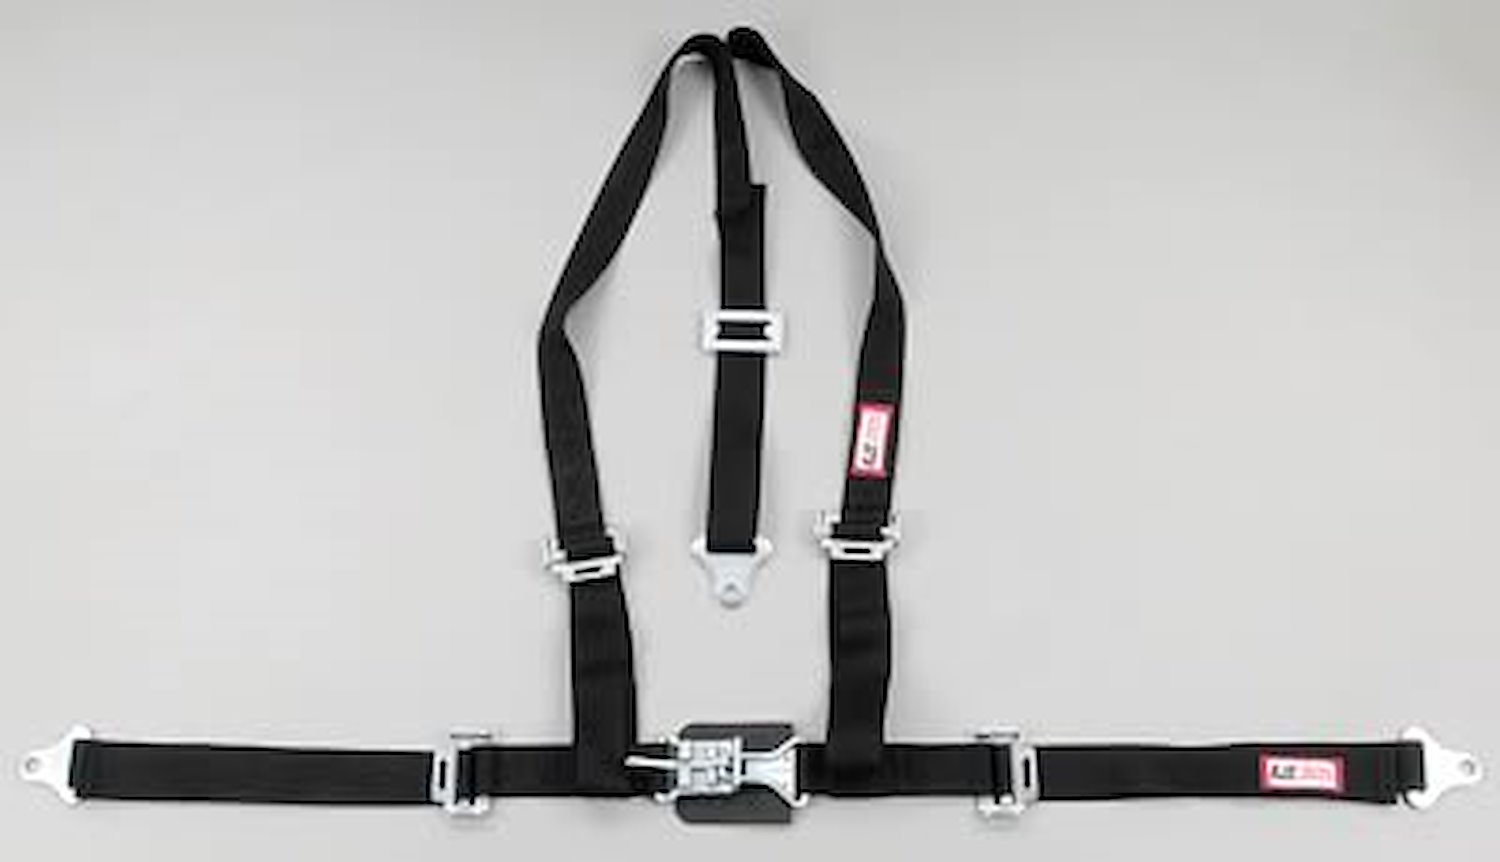 NON-SFI L&L HARNESS 3 PULL UP Lap Belt SEWN IN 2 S.H. Individual ROLL BAR Mount ALL WRAP ENDS BLACK